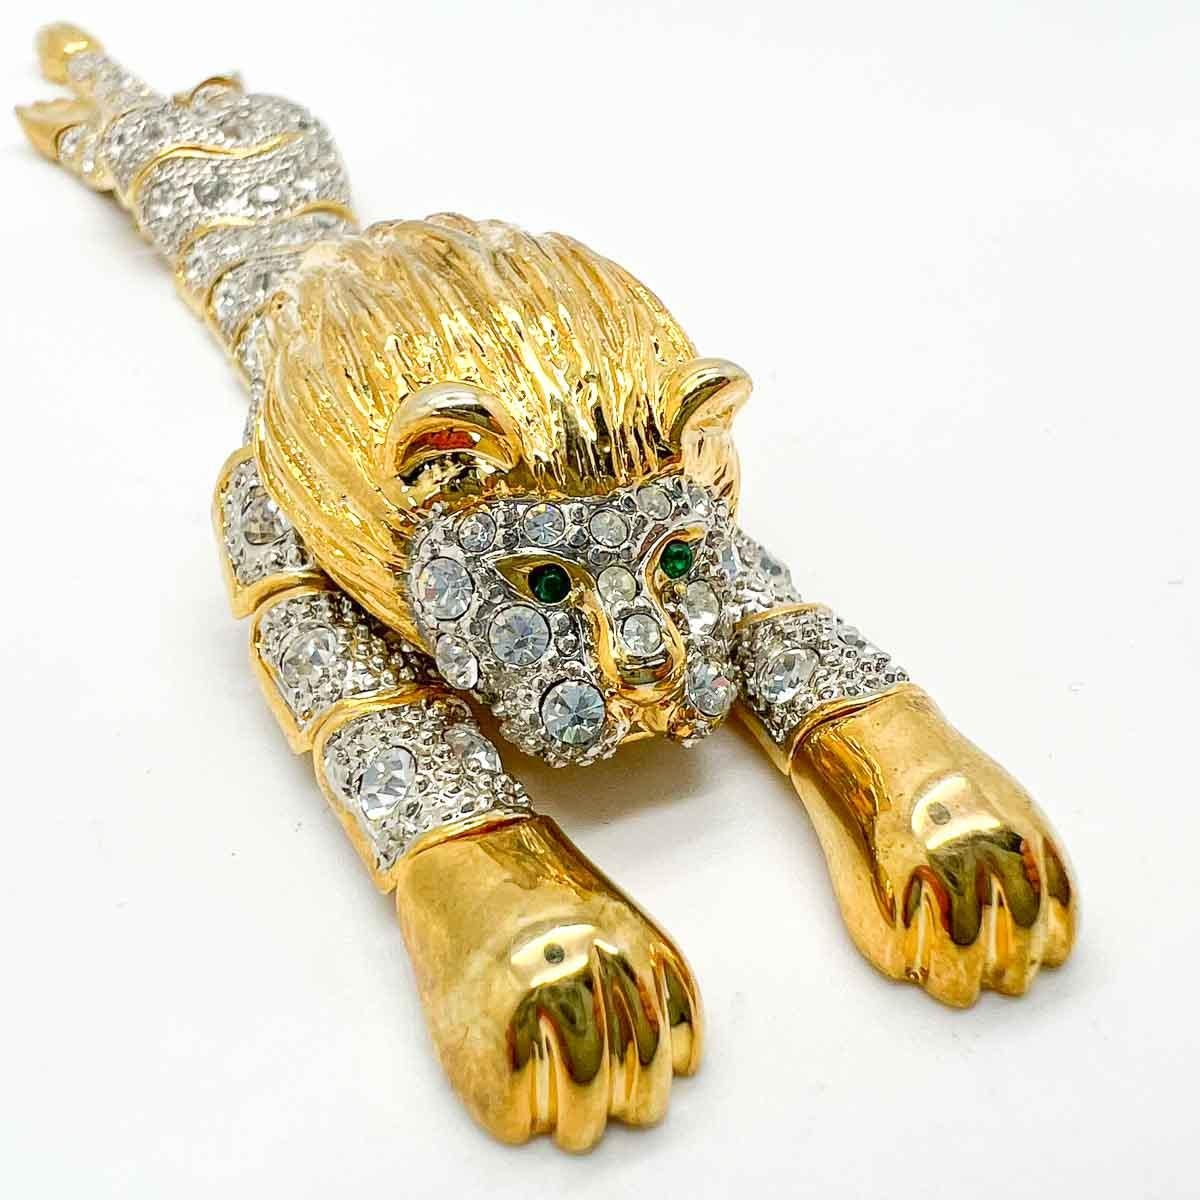 Vintage Statement Reclining Lion Brooch
An unsigned beauty. A rare treasure. Just because a jewel doesn’t carry a designer name, doesn’t mean it isn't coveted. The unsigned beauties in our collection are sourced specifically by Jennifer for their